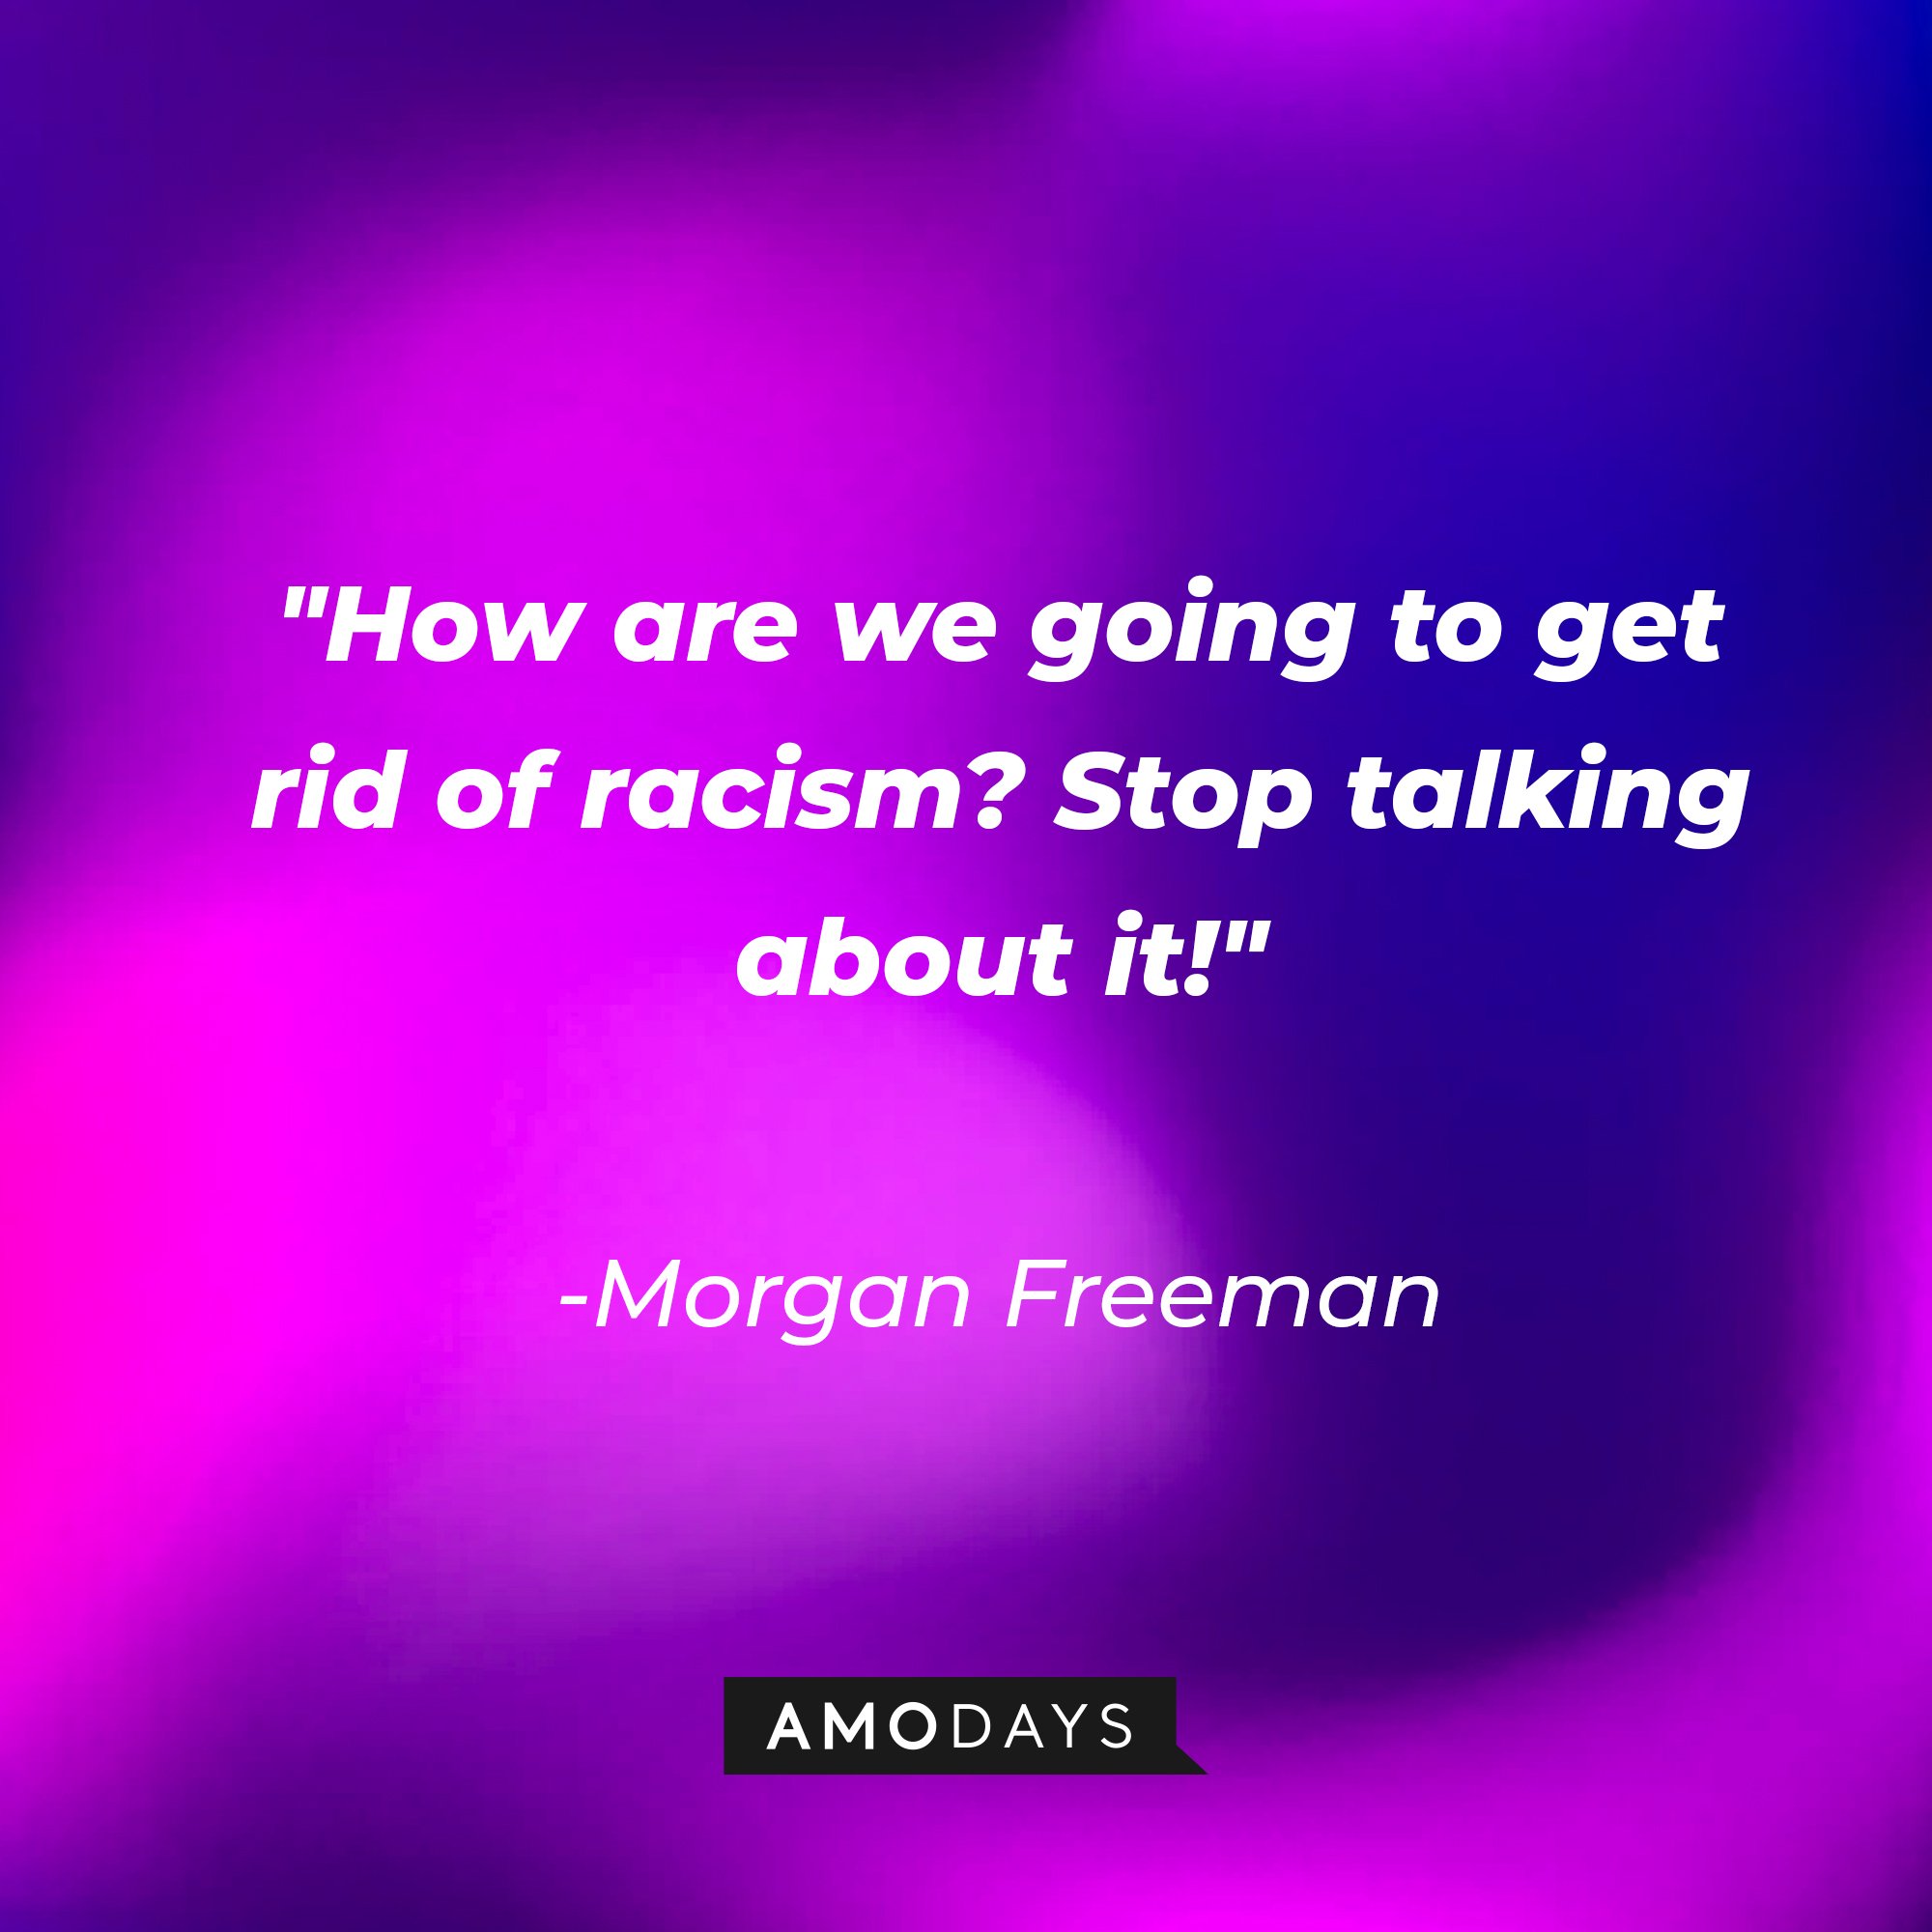 Morgan Freeman’s quote: "How are we going to get rid of racism? Stop talking about it!" | Image: AmoDays 